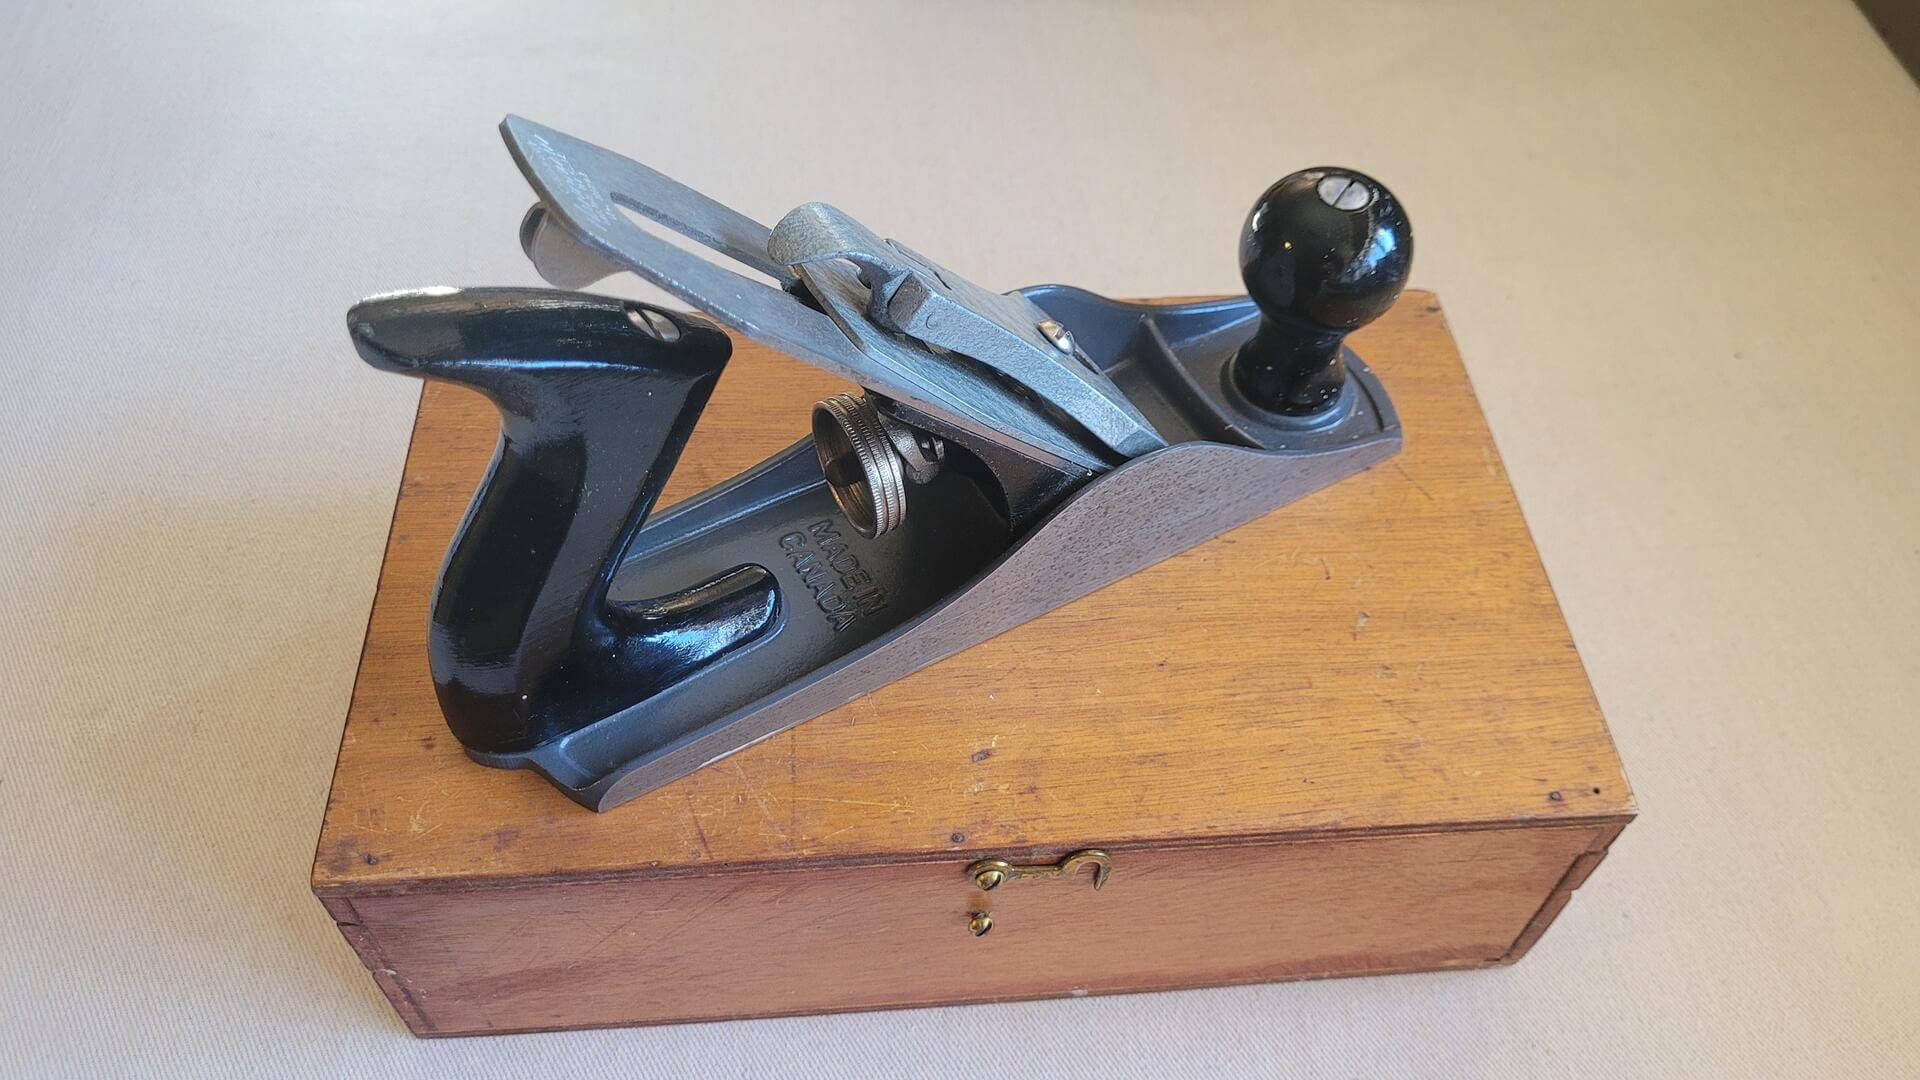 Vintage Stanley Handyman No. H1204 smooth bottom plane with the original wood latch case. Antique made in Canada collectible carpentry and woodworking plane and edge hand tools